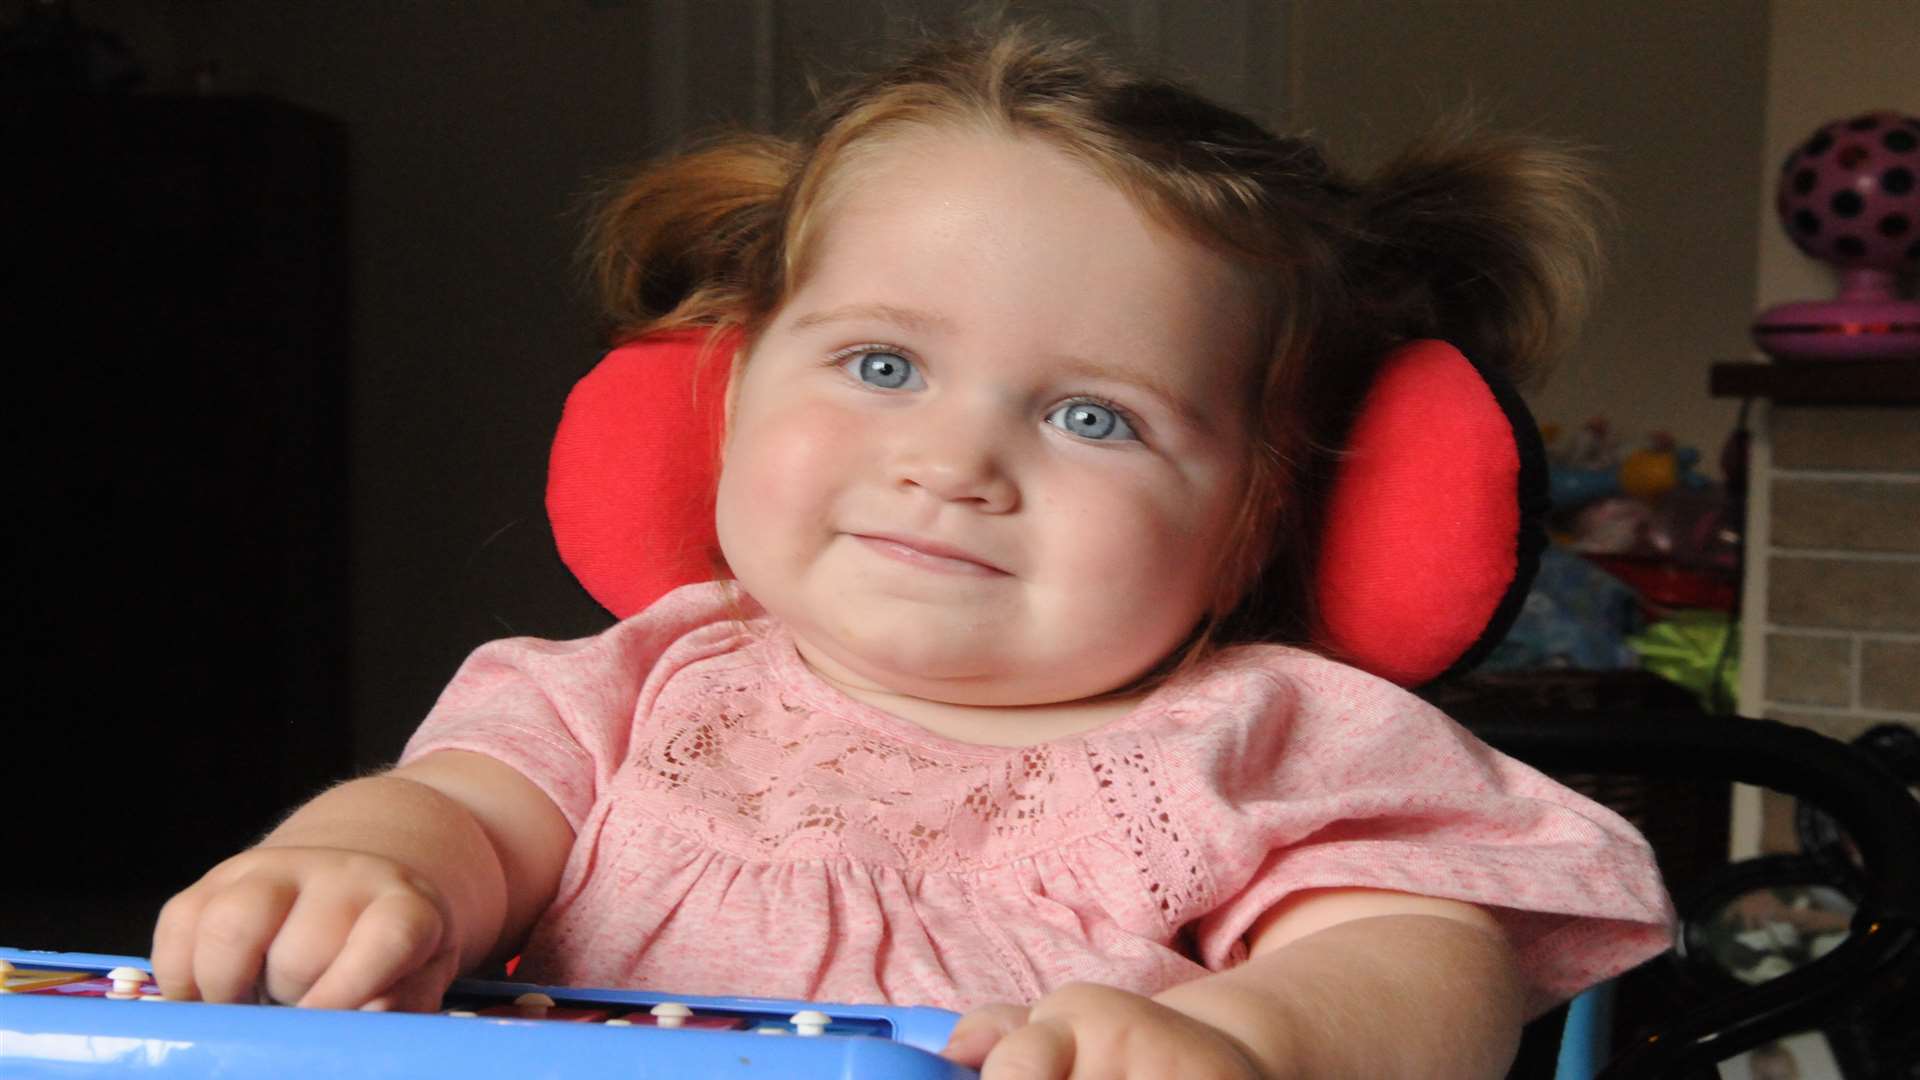 Her parents are trying to raise £26,000 to buy her a specially adapted power wheelchair, called a snap dragon. Picture: Steve Crispe.